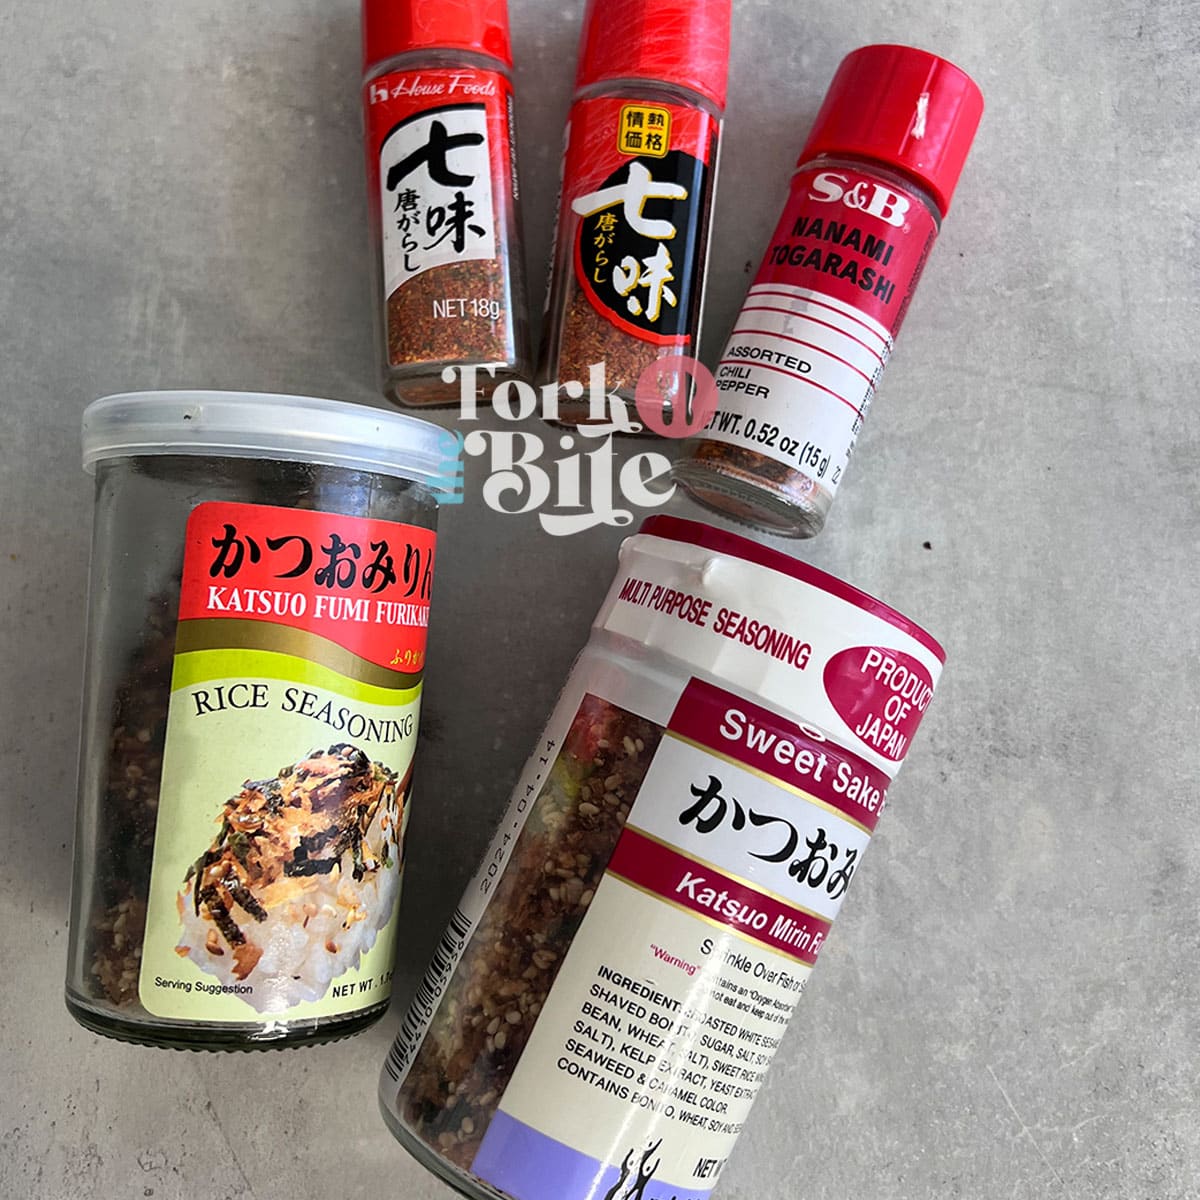 Unravel the mystery of Togarashi vs Furikake. Dive into this culinary adventure and discover the distinct tastes of these iconic Japanese seasonings!